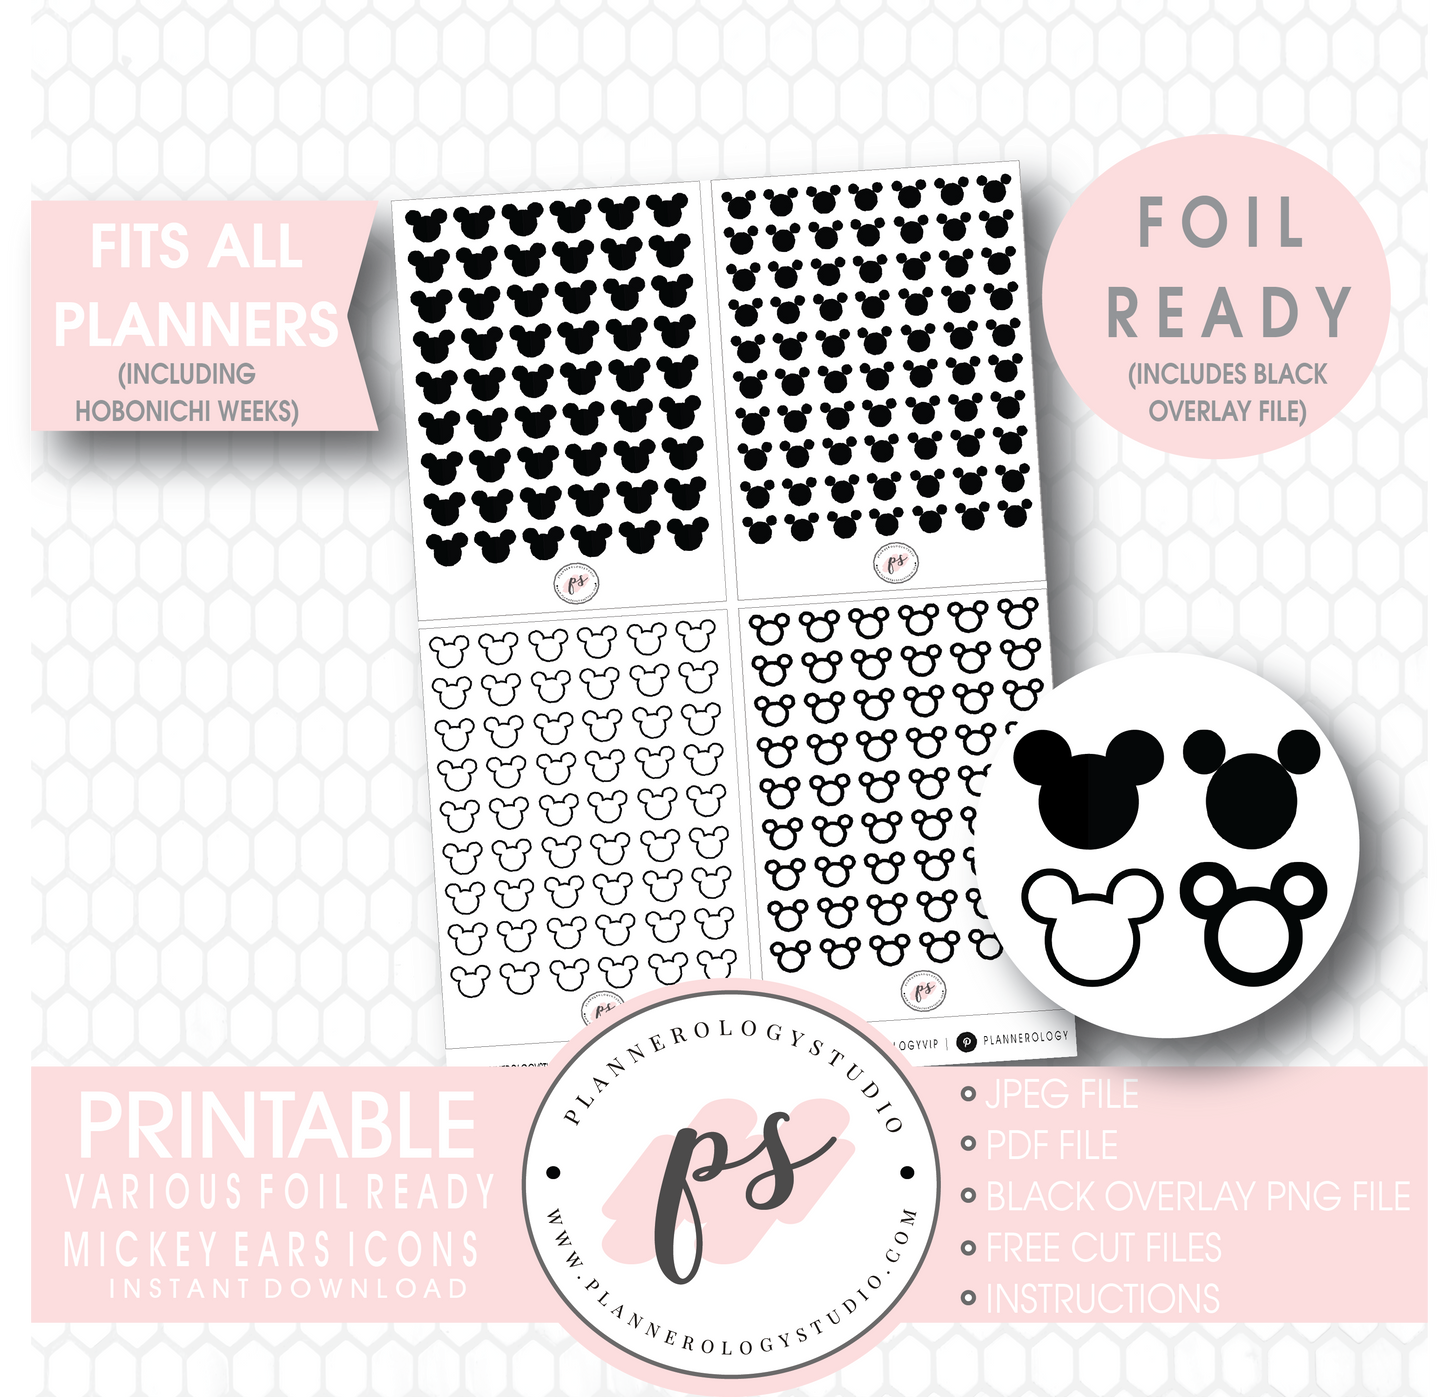 Various Disney Mickey Mouse Ears Inspired Icon Digital Printable Hobonichi Weeks Planner Stickers (Foil Ready) - Plannerologystudio